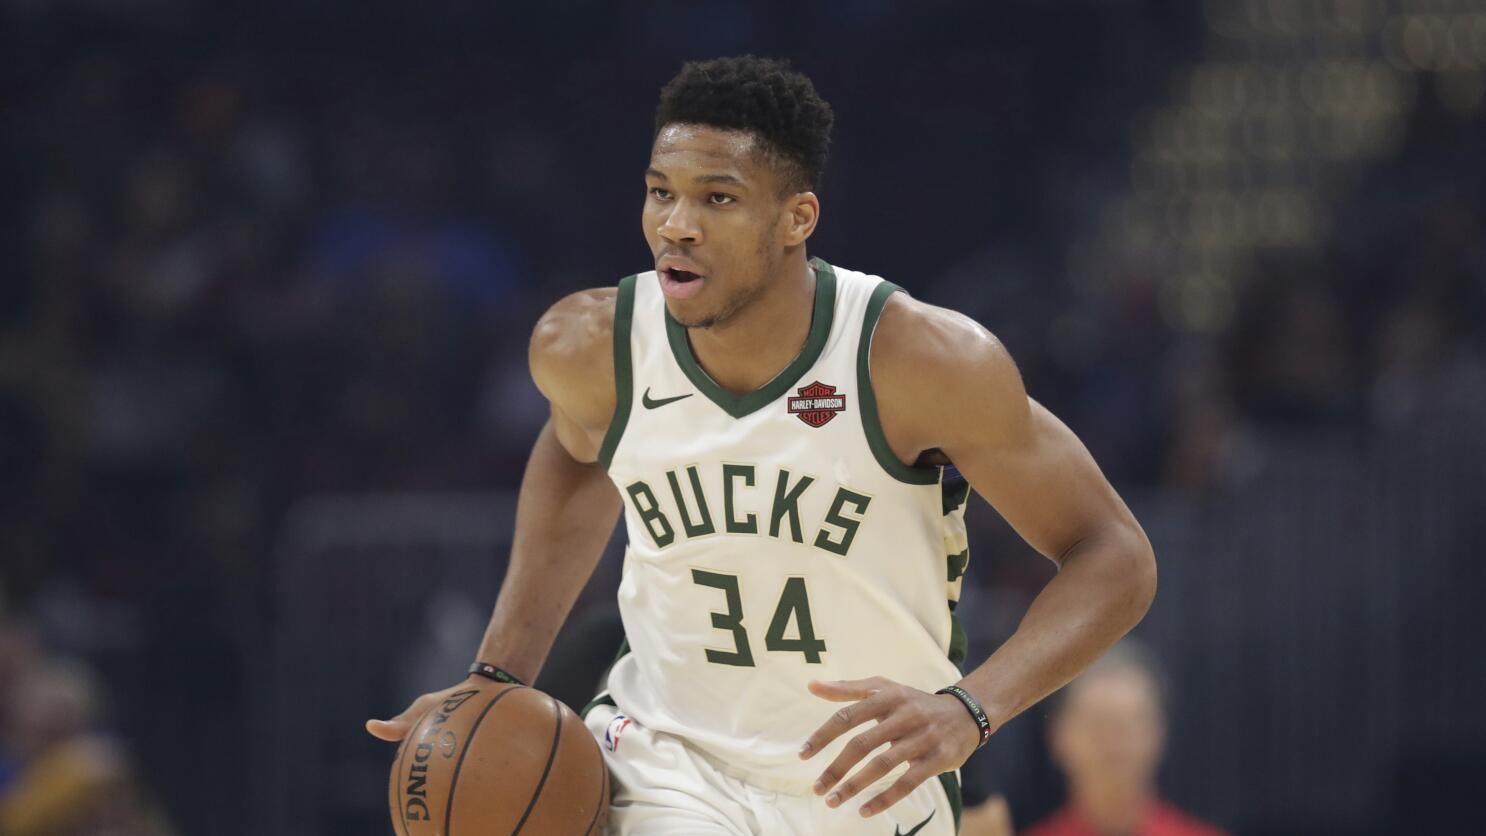 Los Angeles Clippers vs Milwaukee Bucks: Match Preview and Predictions -  6th December 2019